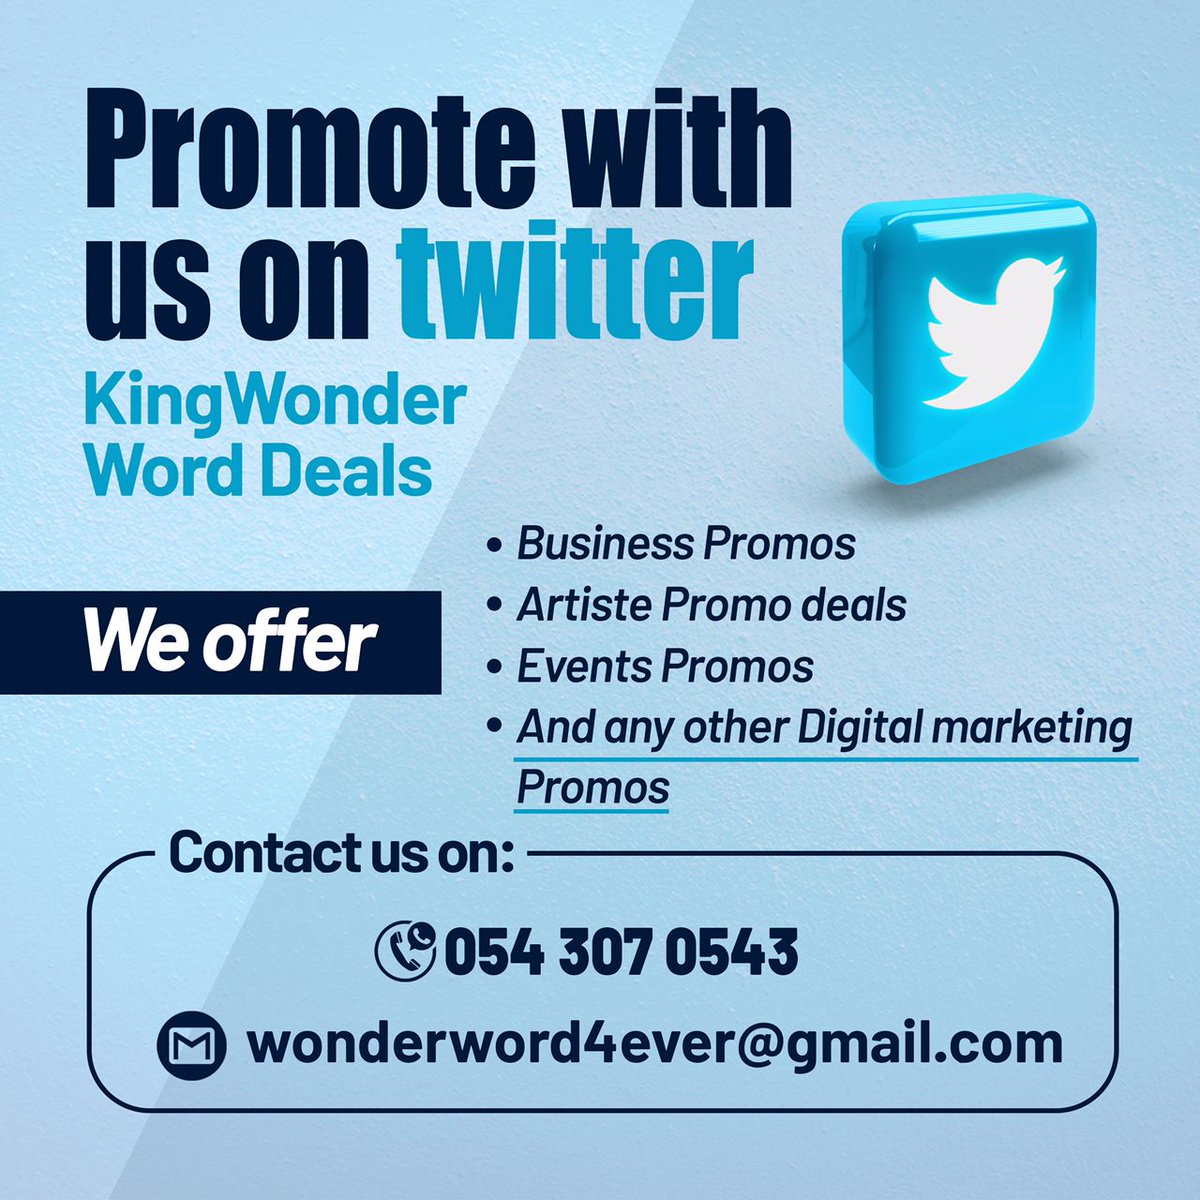 Are you a small business?? Are you an artiste seeking visibility?? Are you hosting an event and need Promos. Contact KingWonderWord Deals for all your promo deals. We are just a DM away. 
#KingWonderWordPromoDeals
#WeGotYouCovered